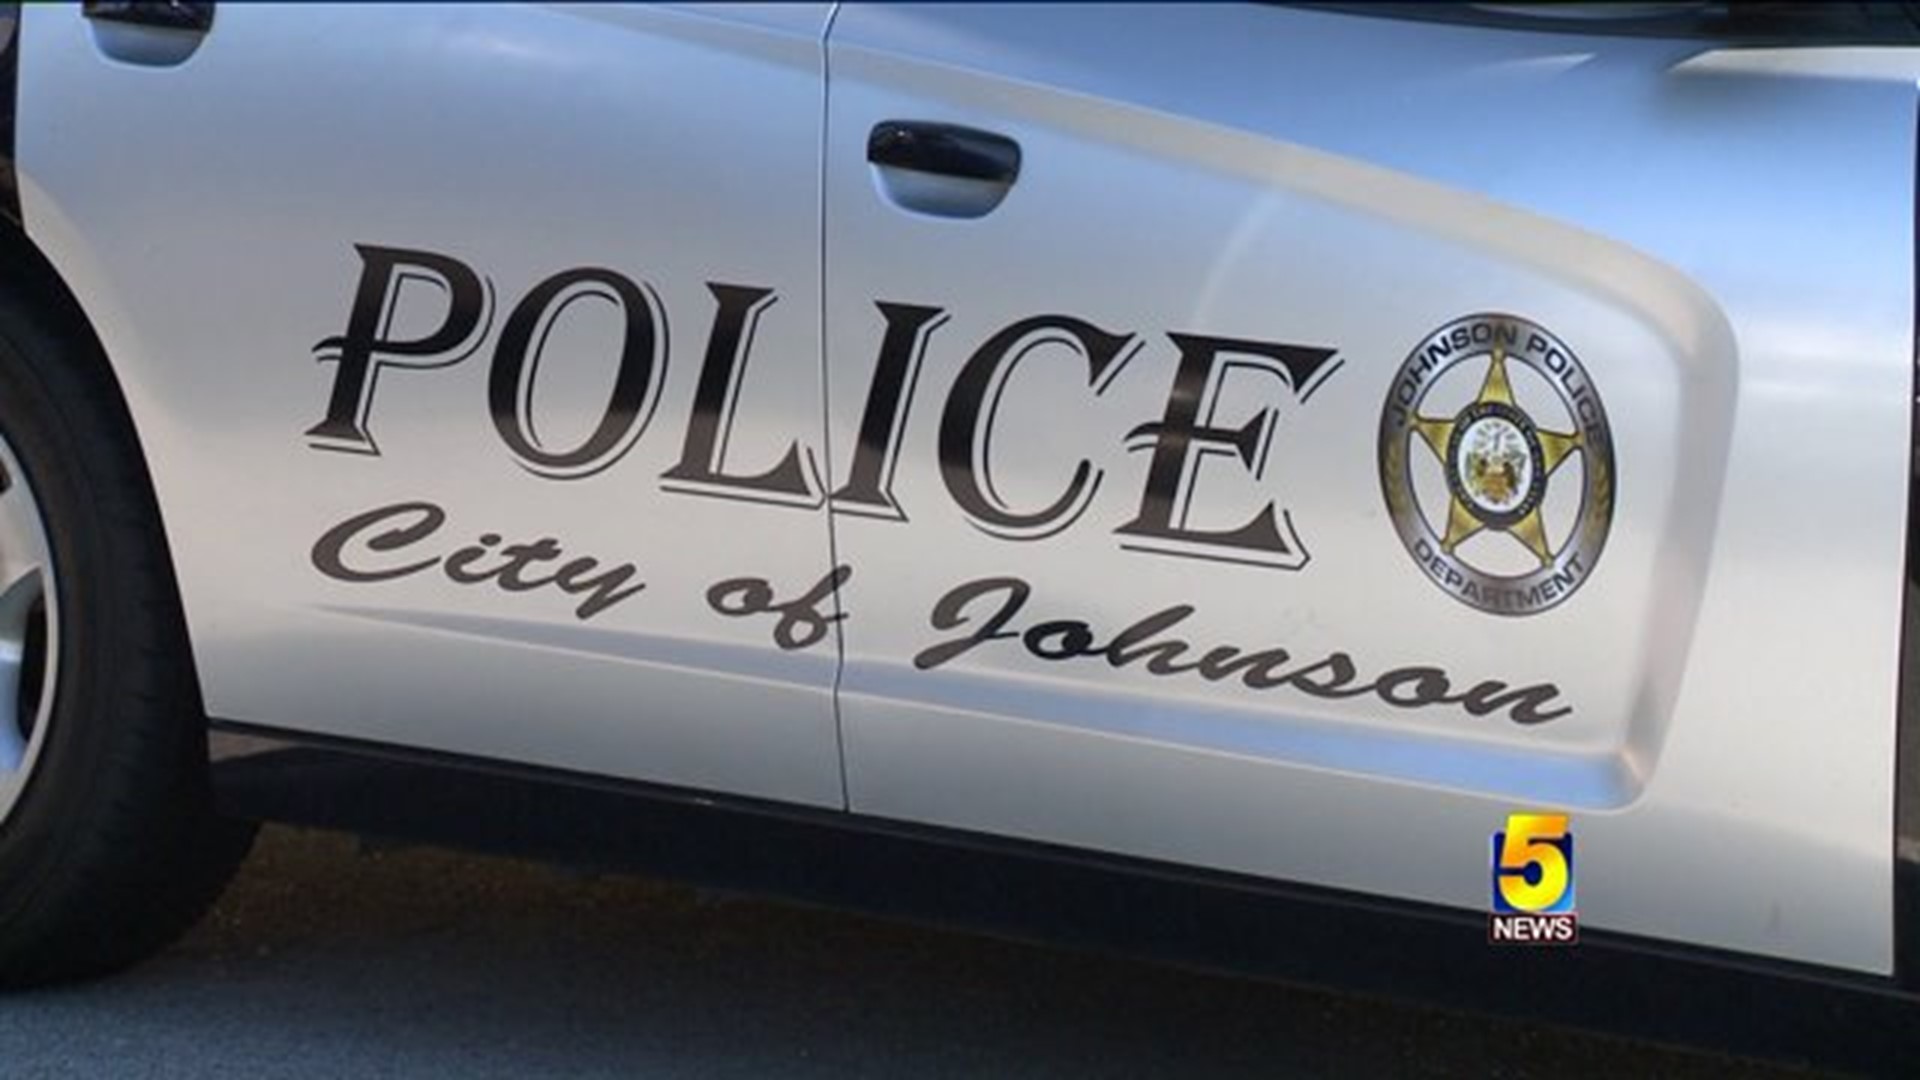 Johnson Police Chief Reinstated